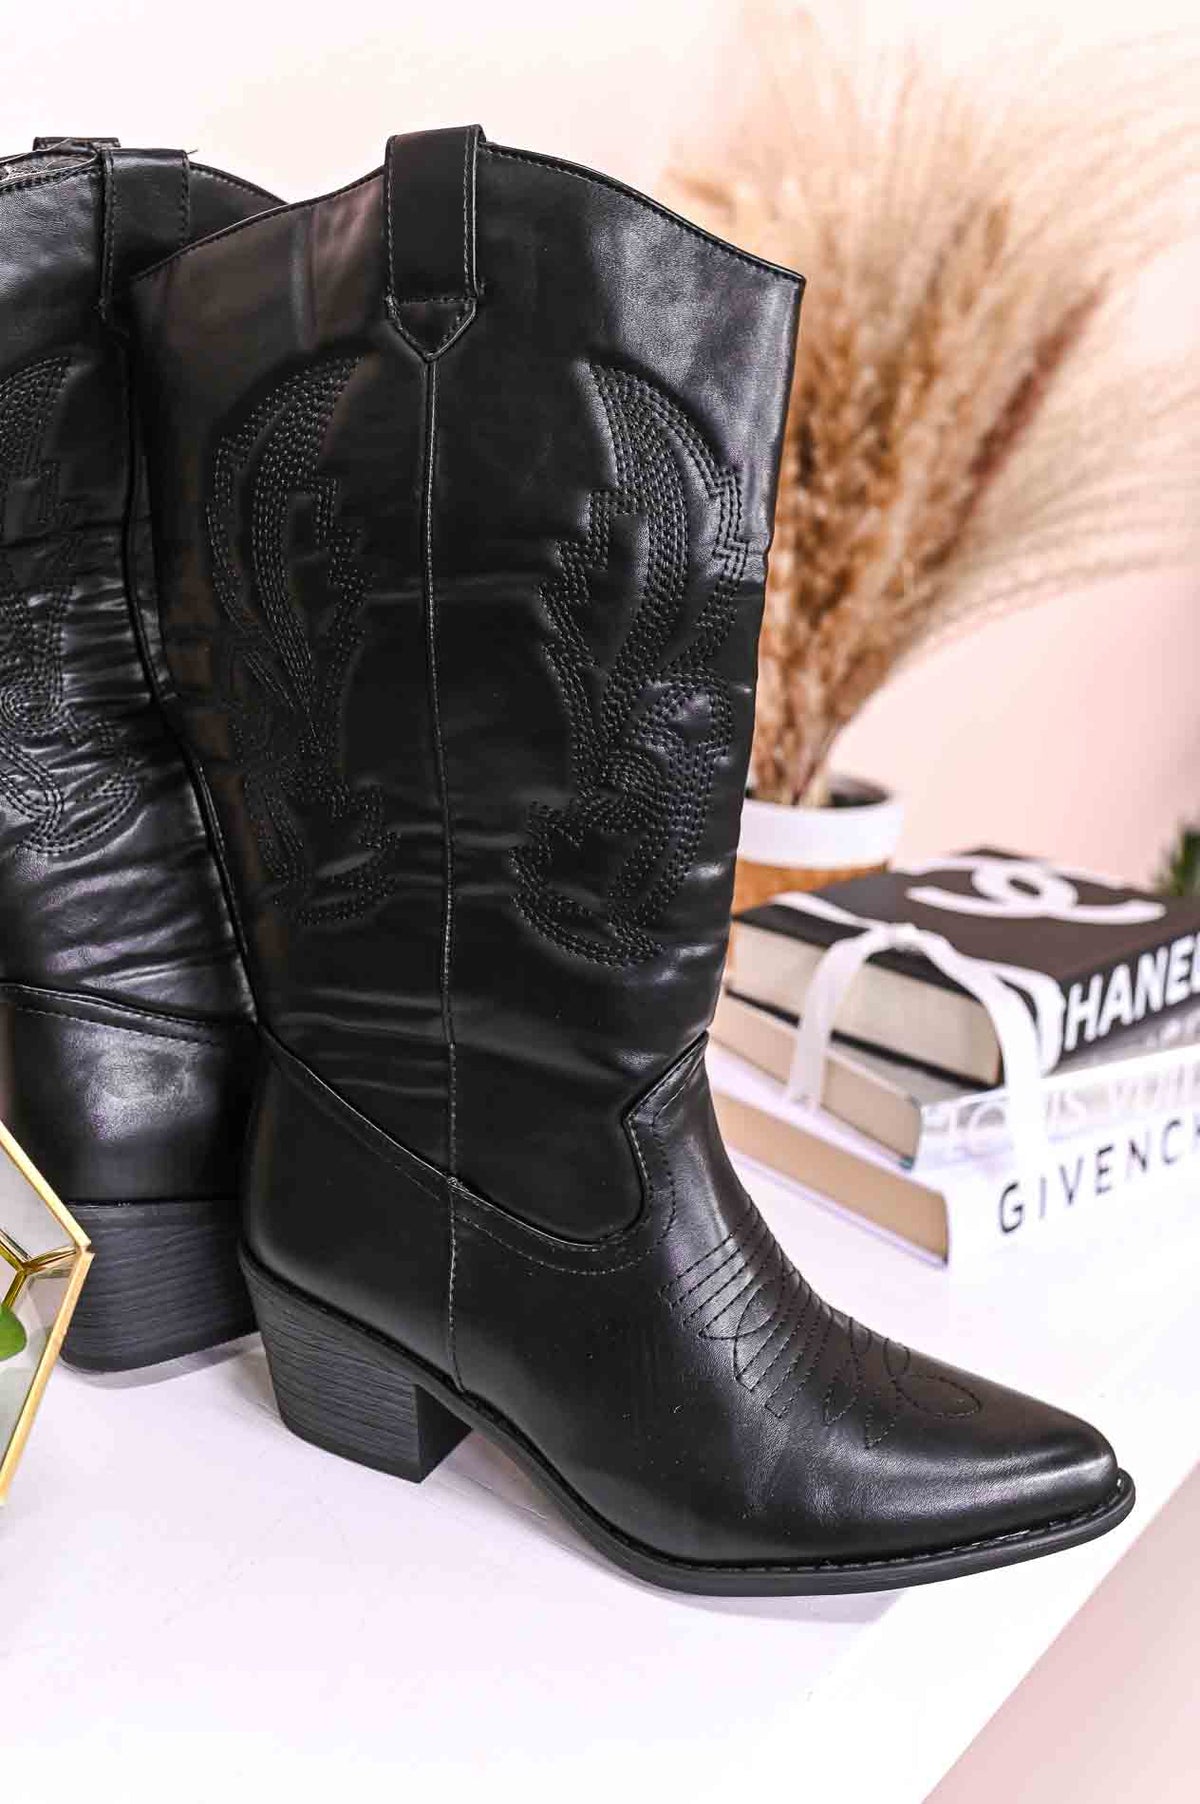 Don't Fight The Feeling Black Cowgirl Boots - SHO2480BK